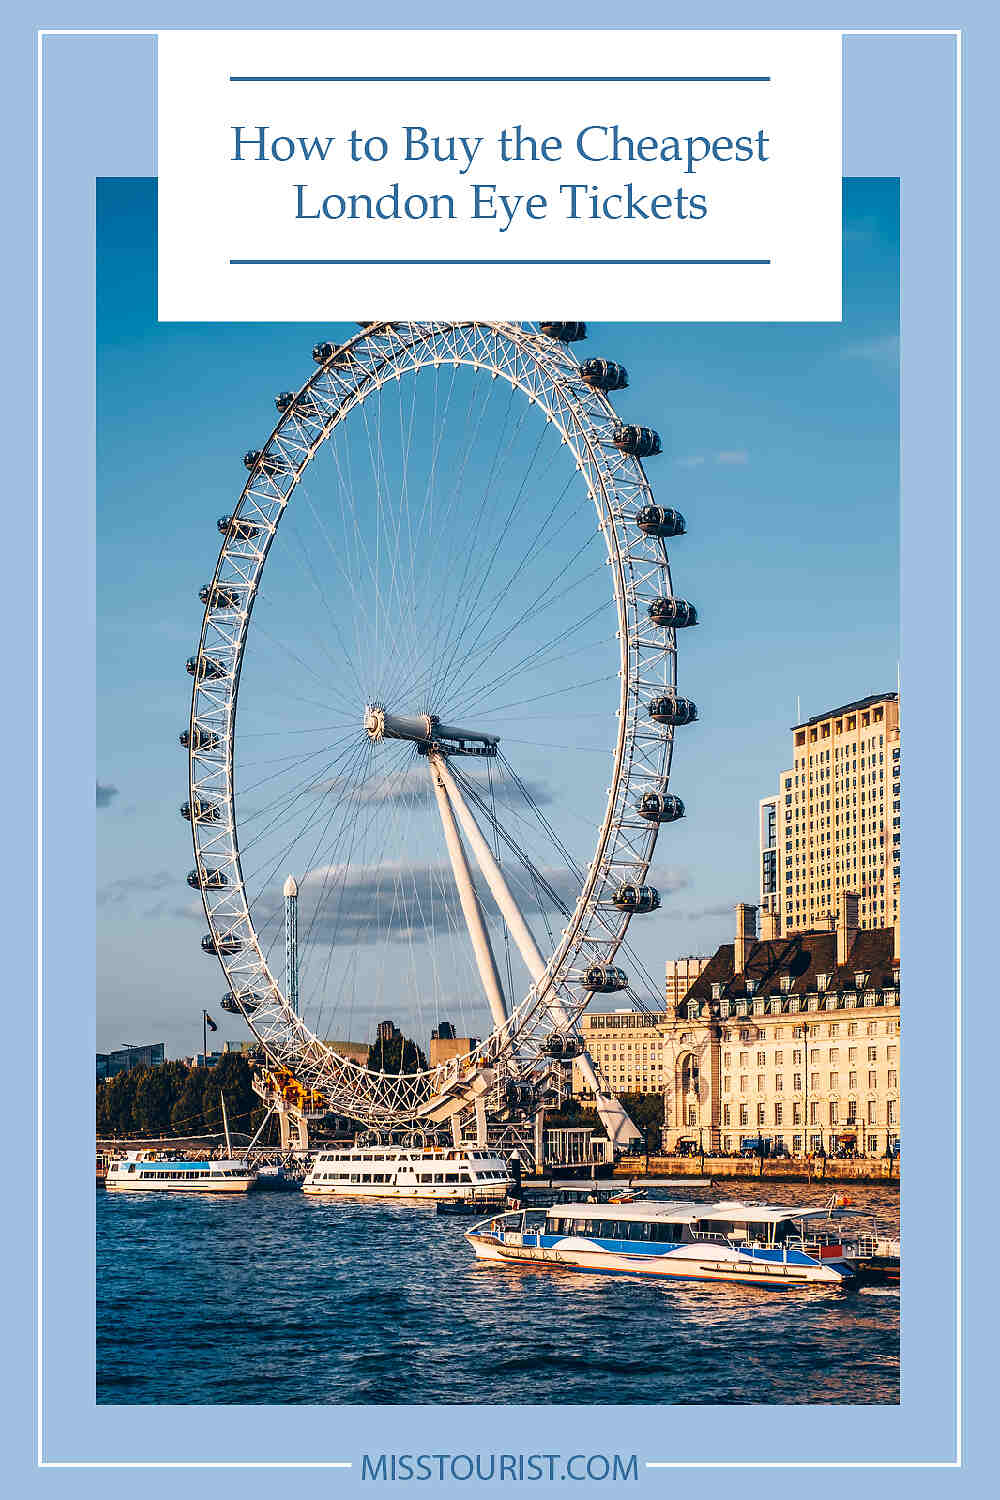 How to Buy the Cheapest London Eye Tickets PIN 2